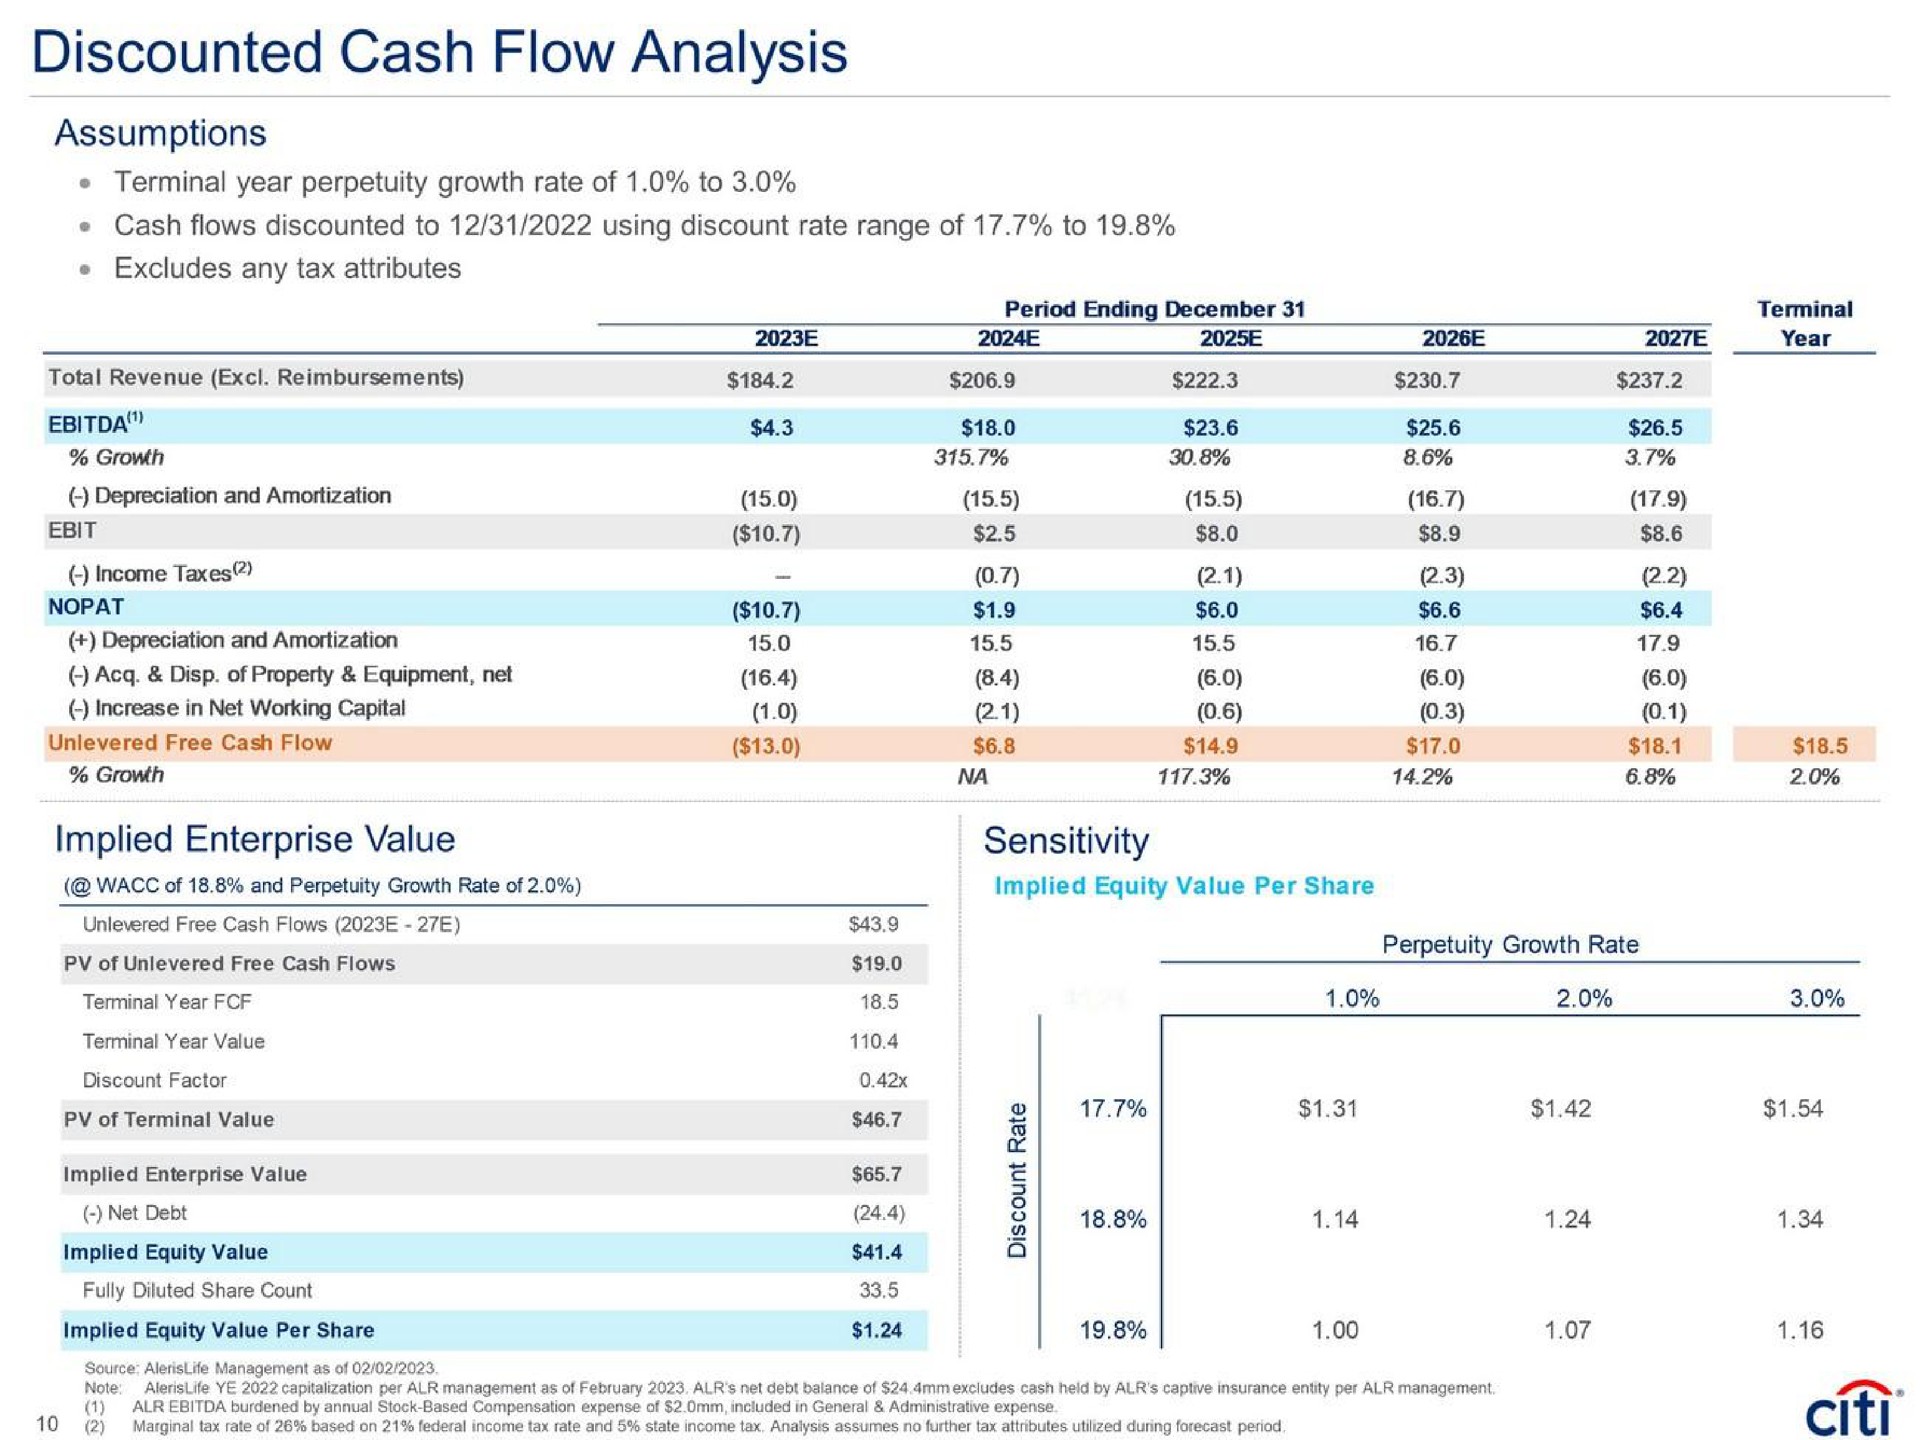 discounted cash flow analysis assumptions terminal year perpetuity growth rate of to implied enterprise value sensitivity | Citi